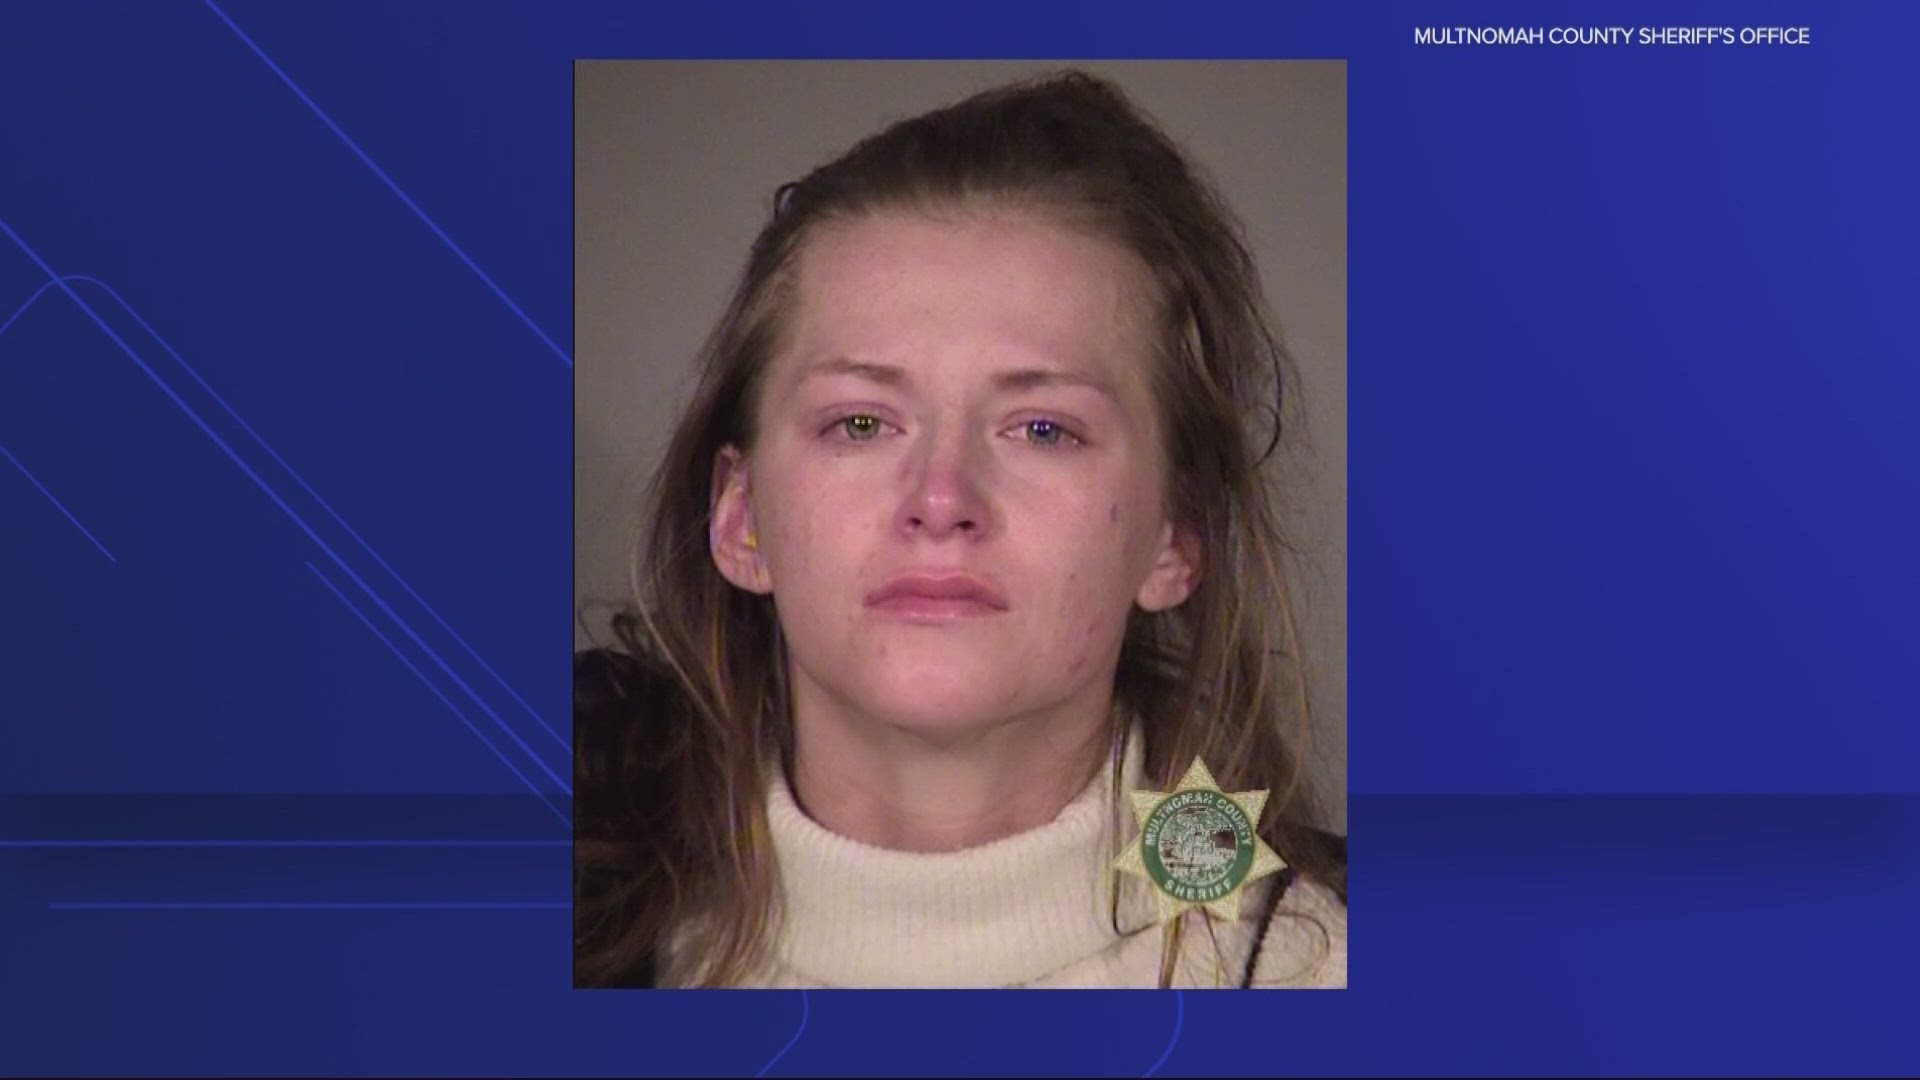 Sabrina Cox escaped authorities on Monday after being charged with identify theft by climbing through a bathroom ceiling at OHSU.